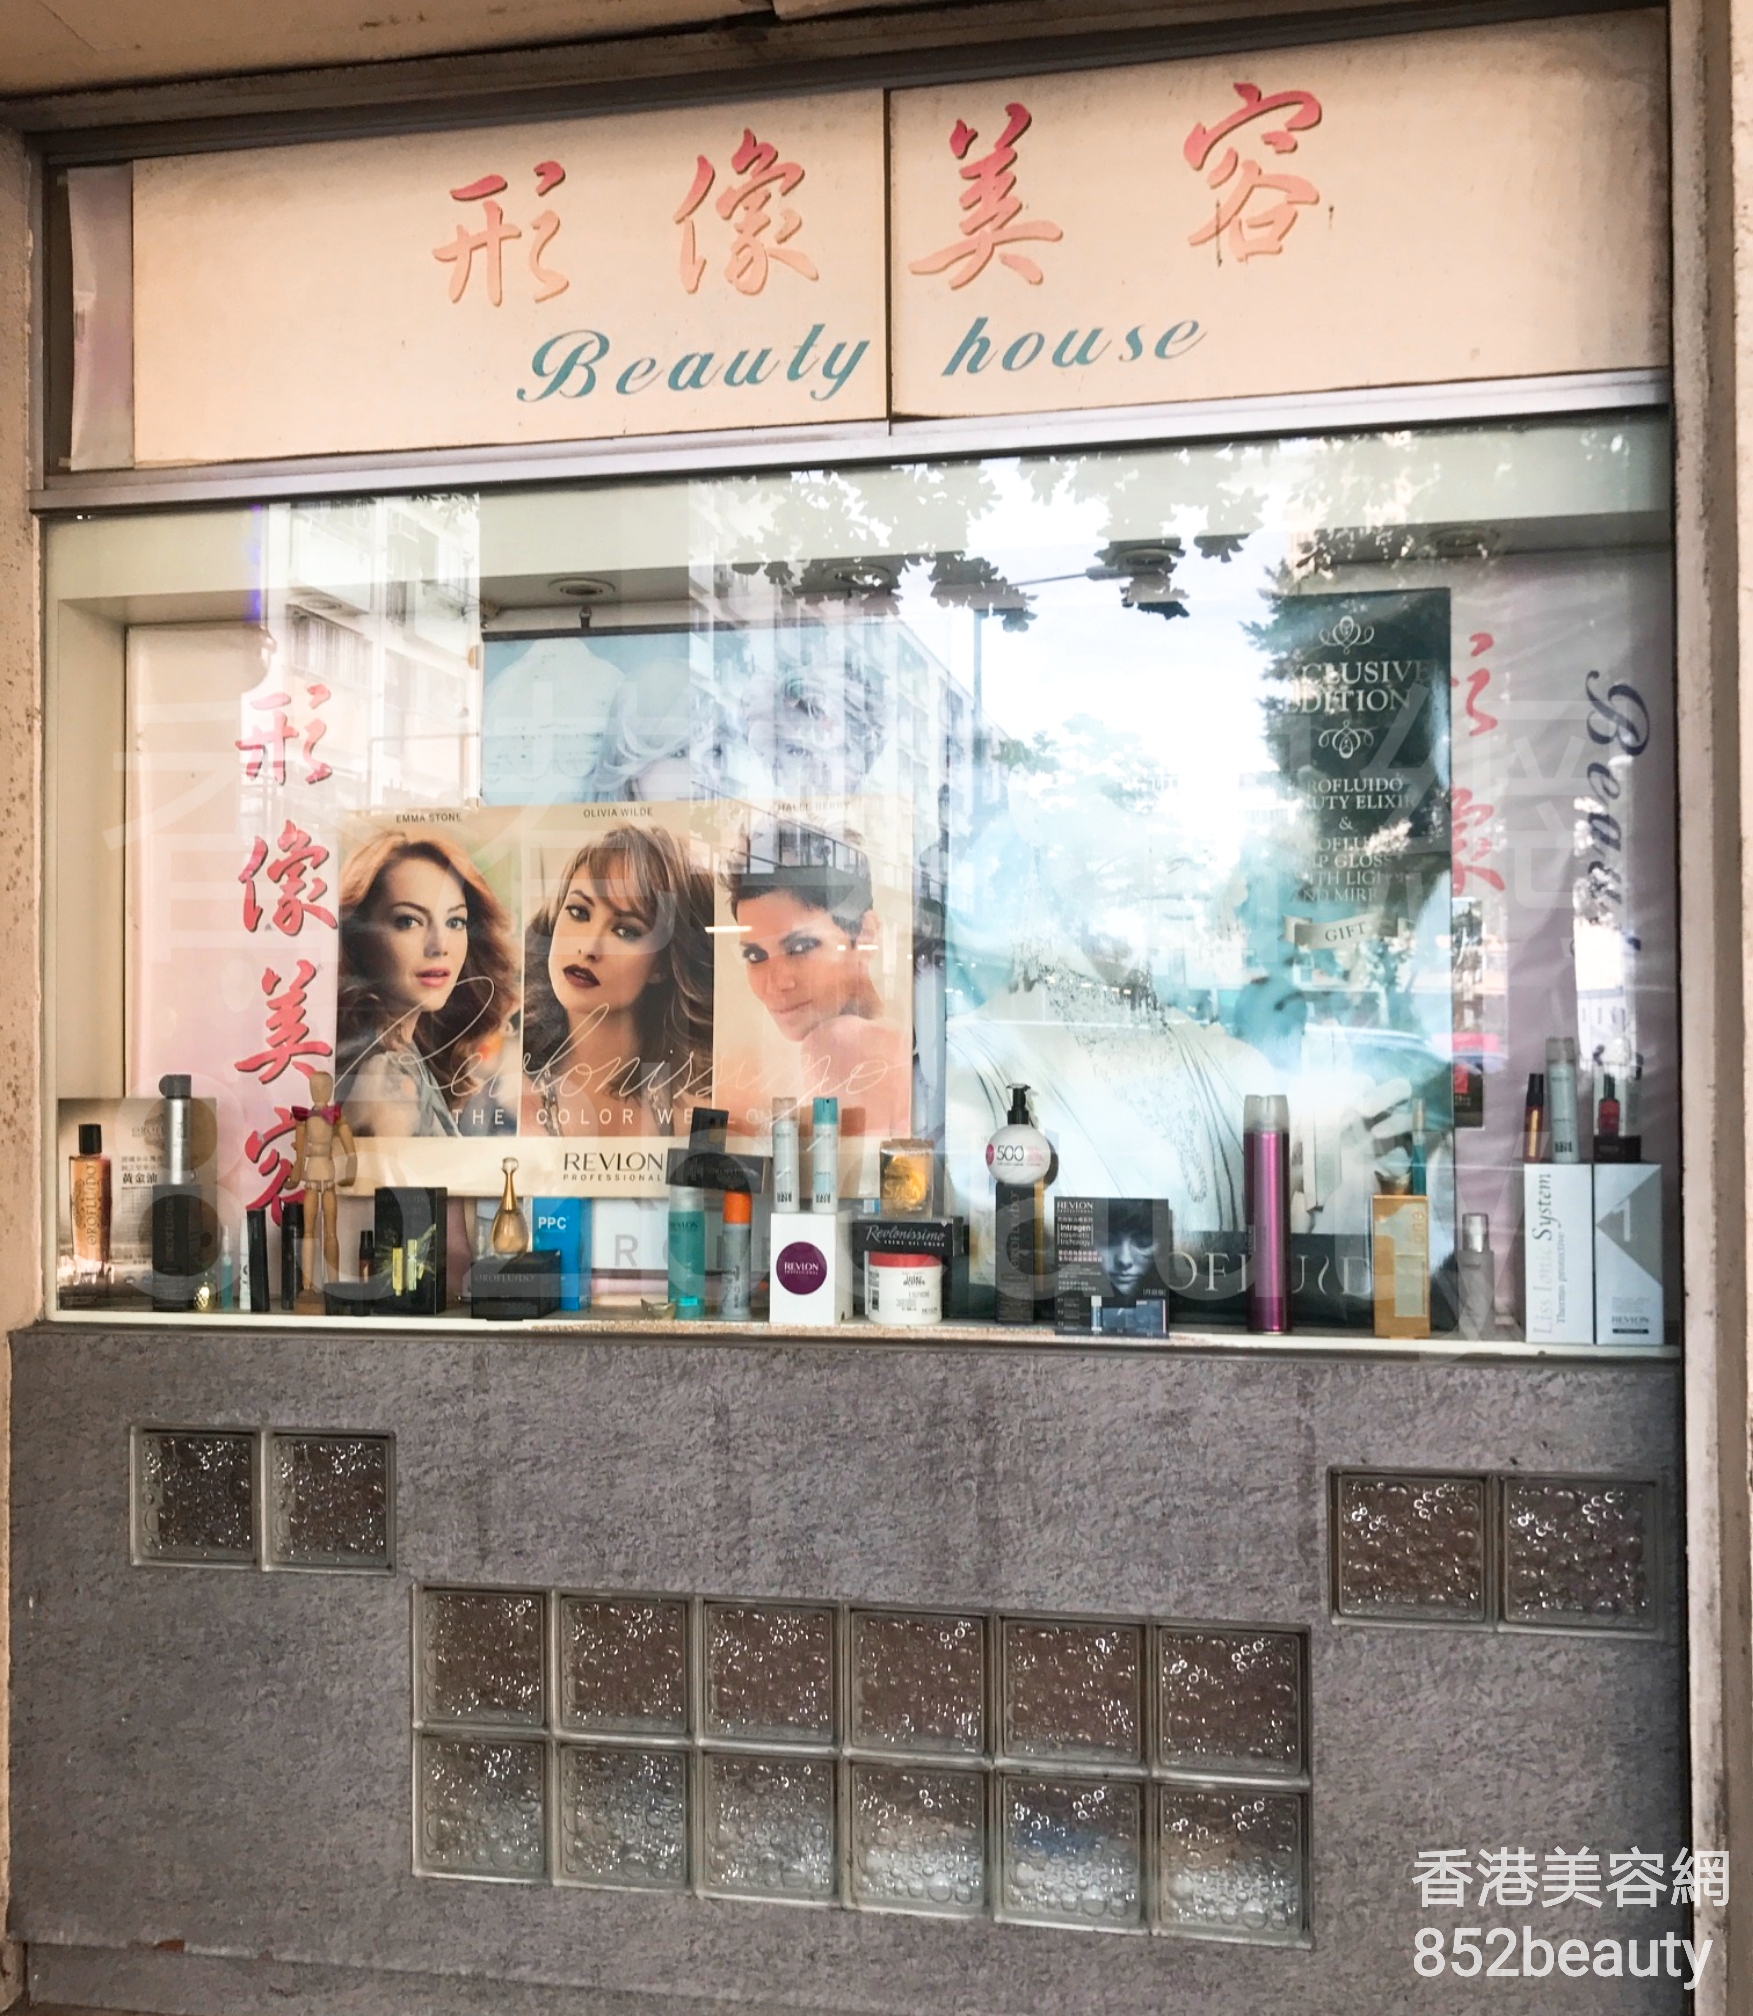 Hand and foot care: 形像美容 Beauty House